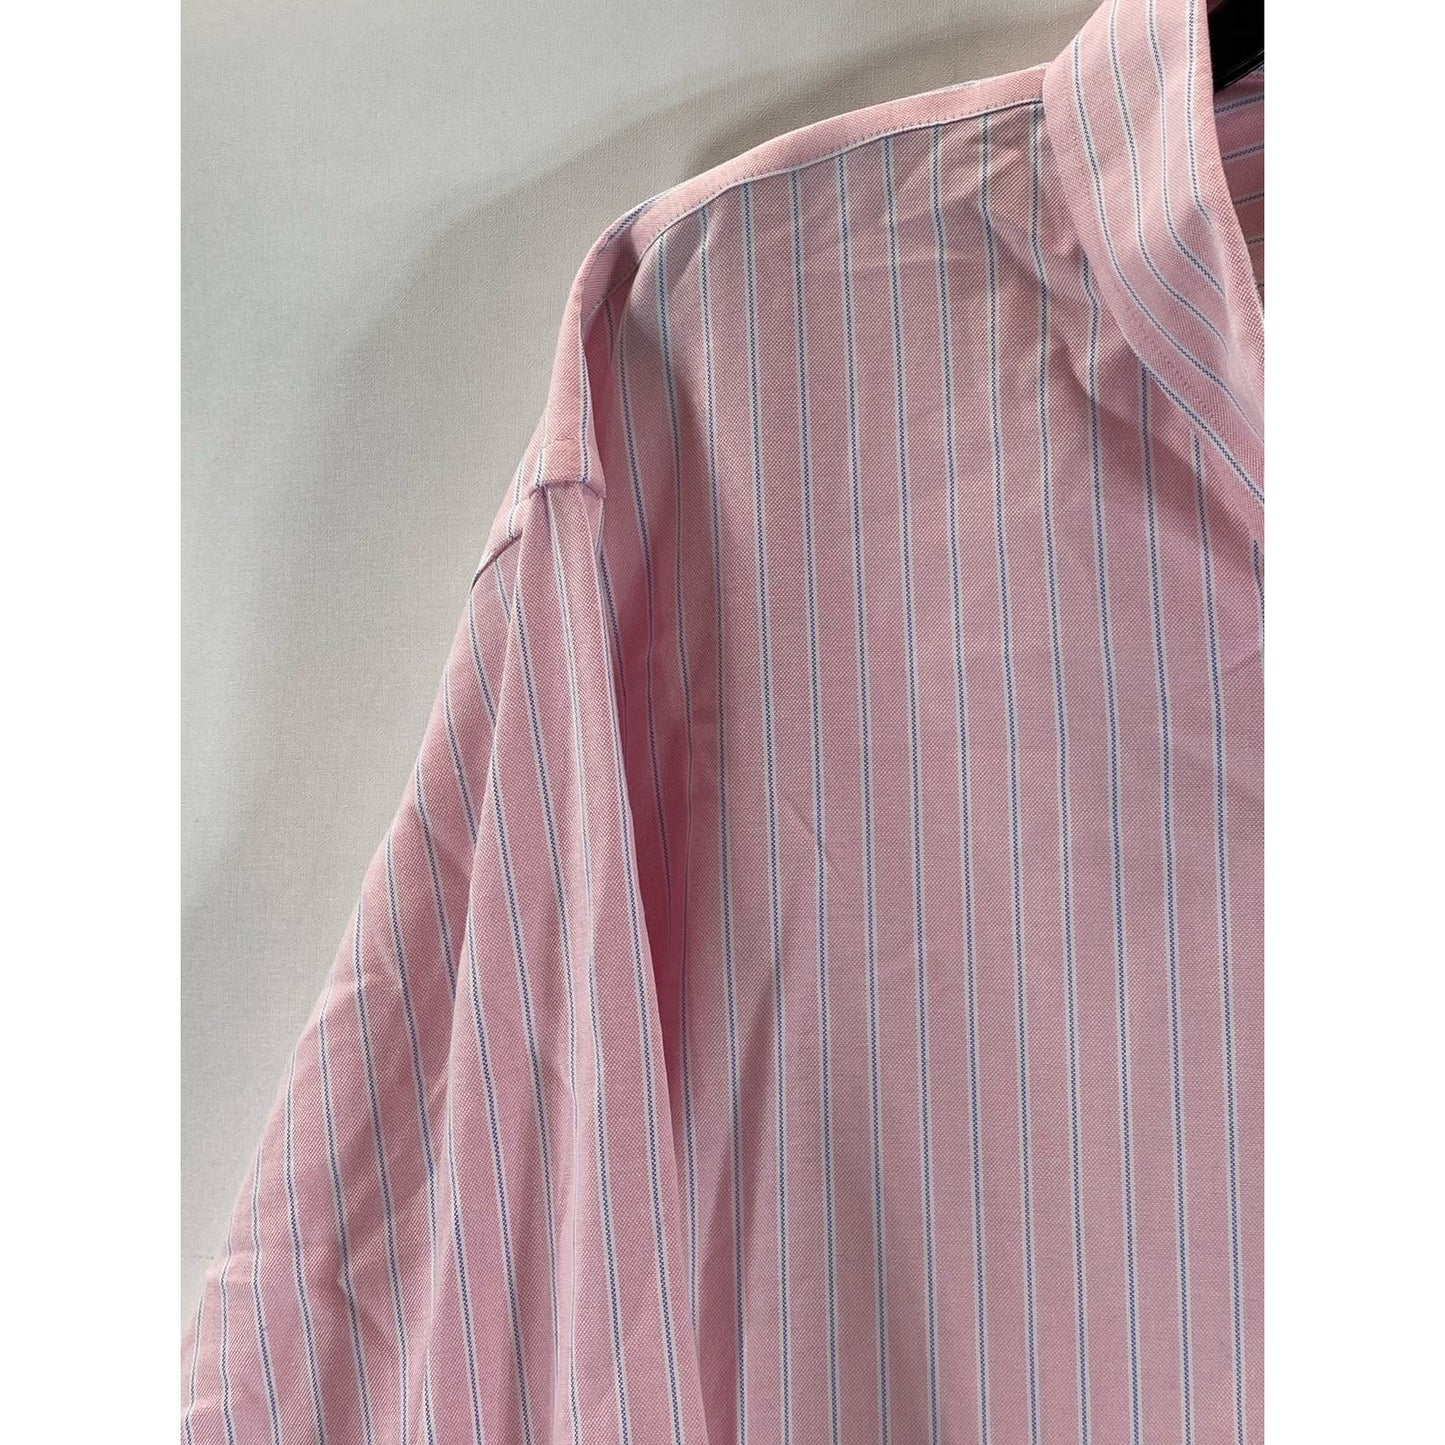 LANDS' END Men's Pink Striped Traditional-Fit No Iron Oxford Shirt SZ 17.5-34